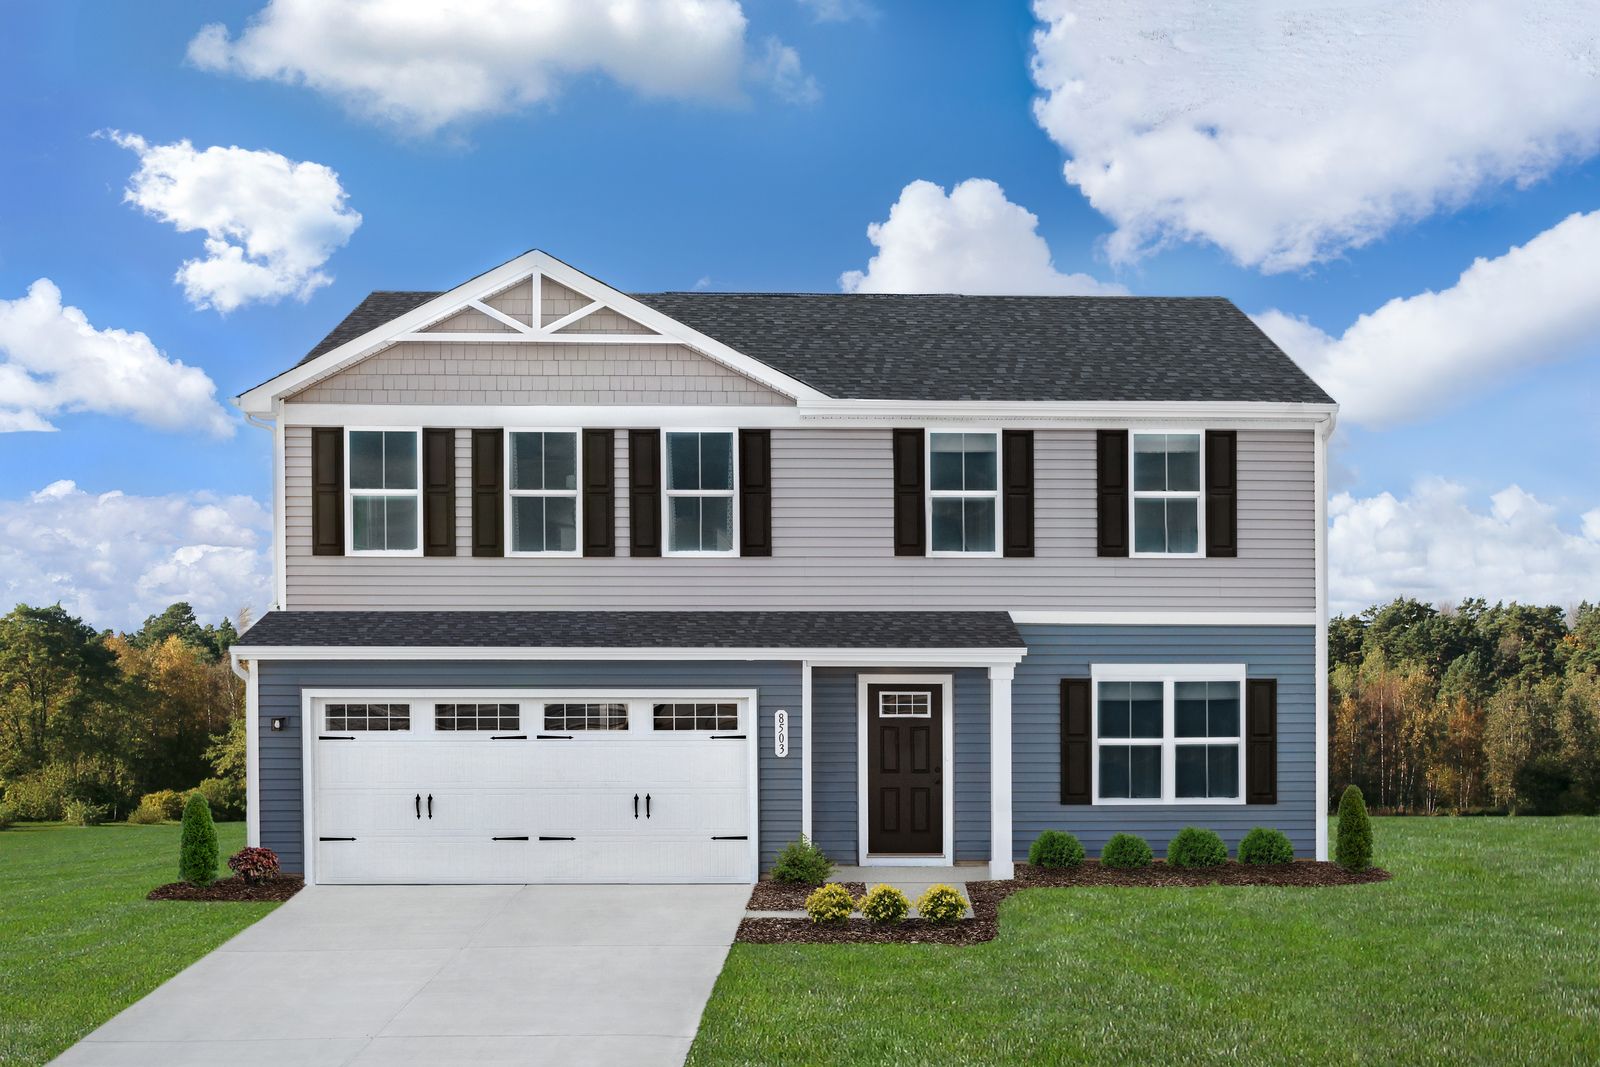 Don't Miss Out on Your Opportunity to Own at Meade's Crossing!